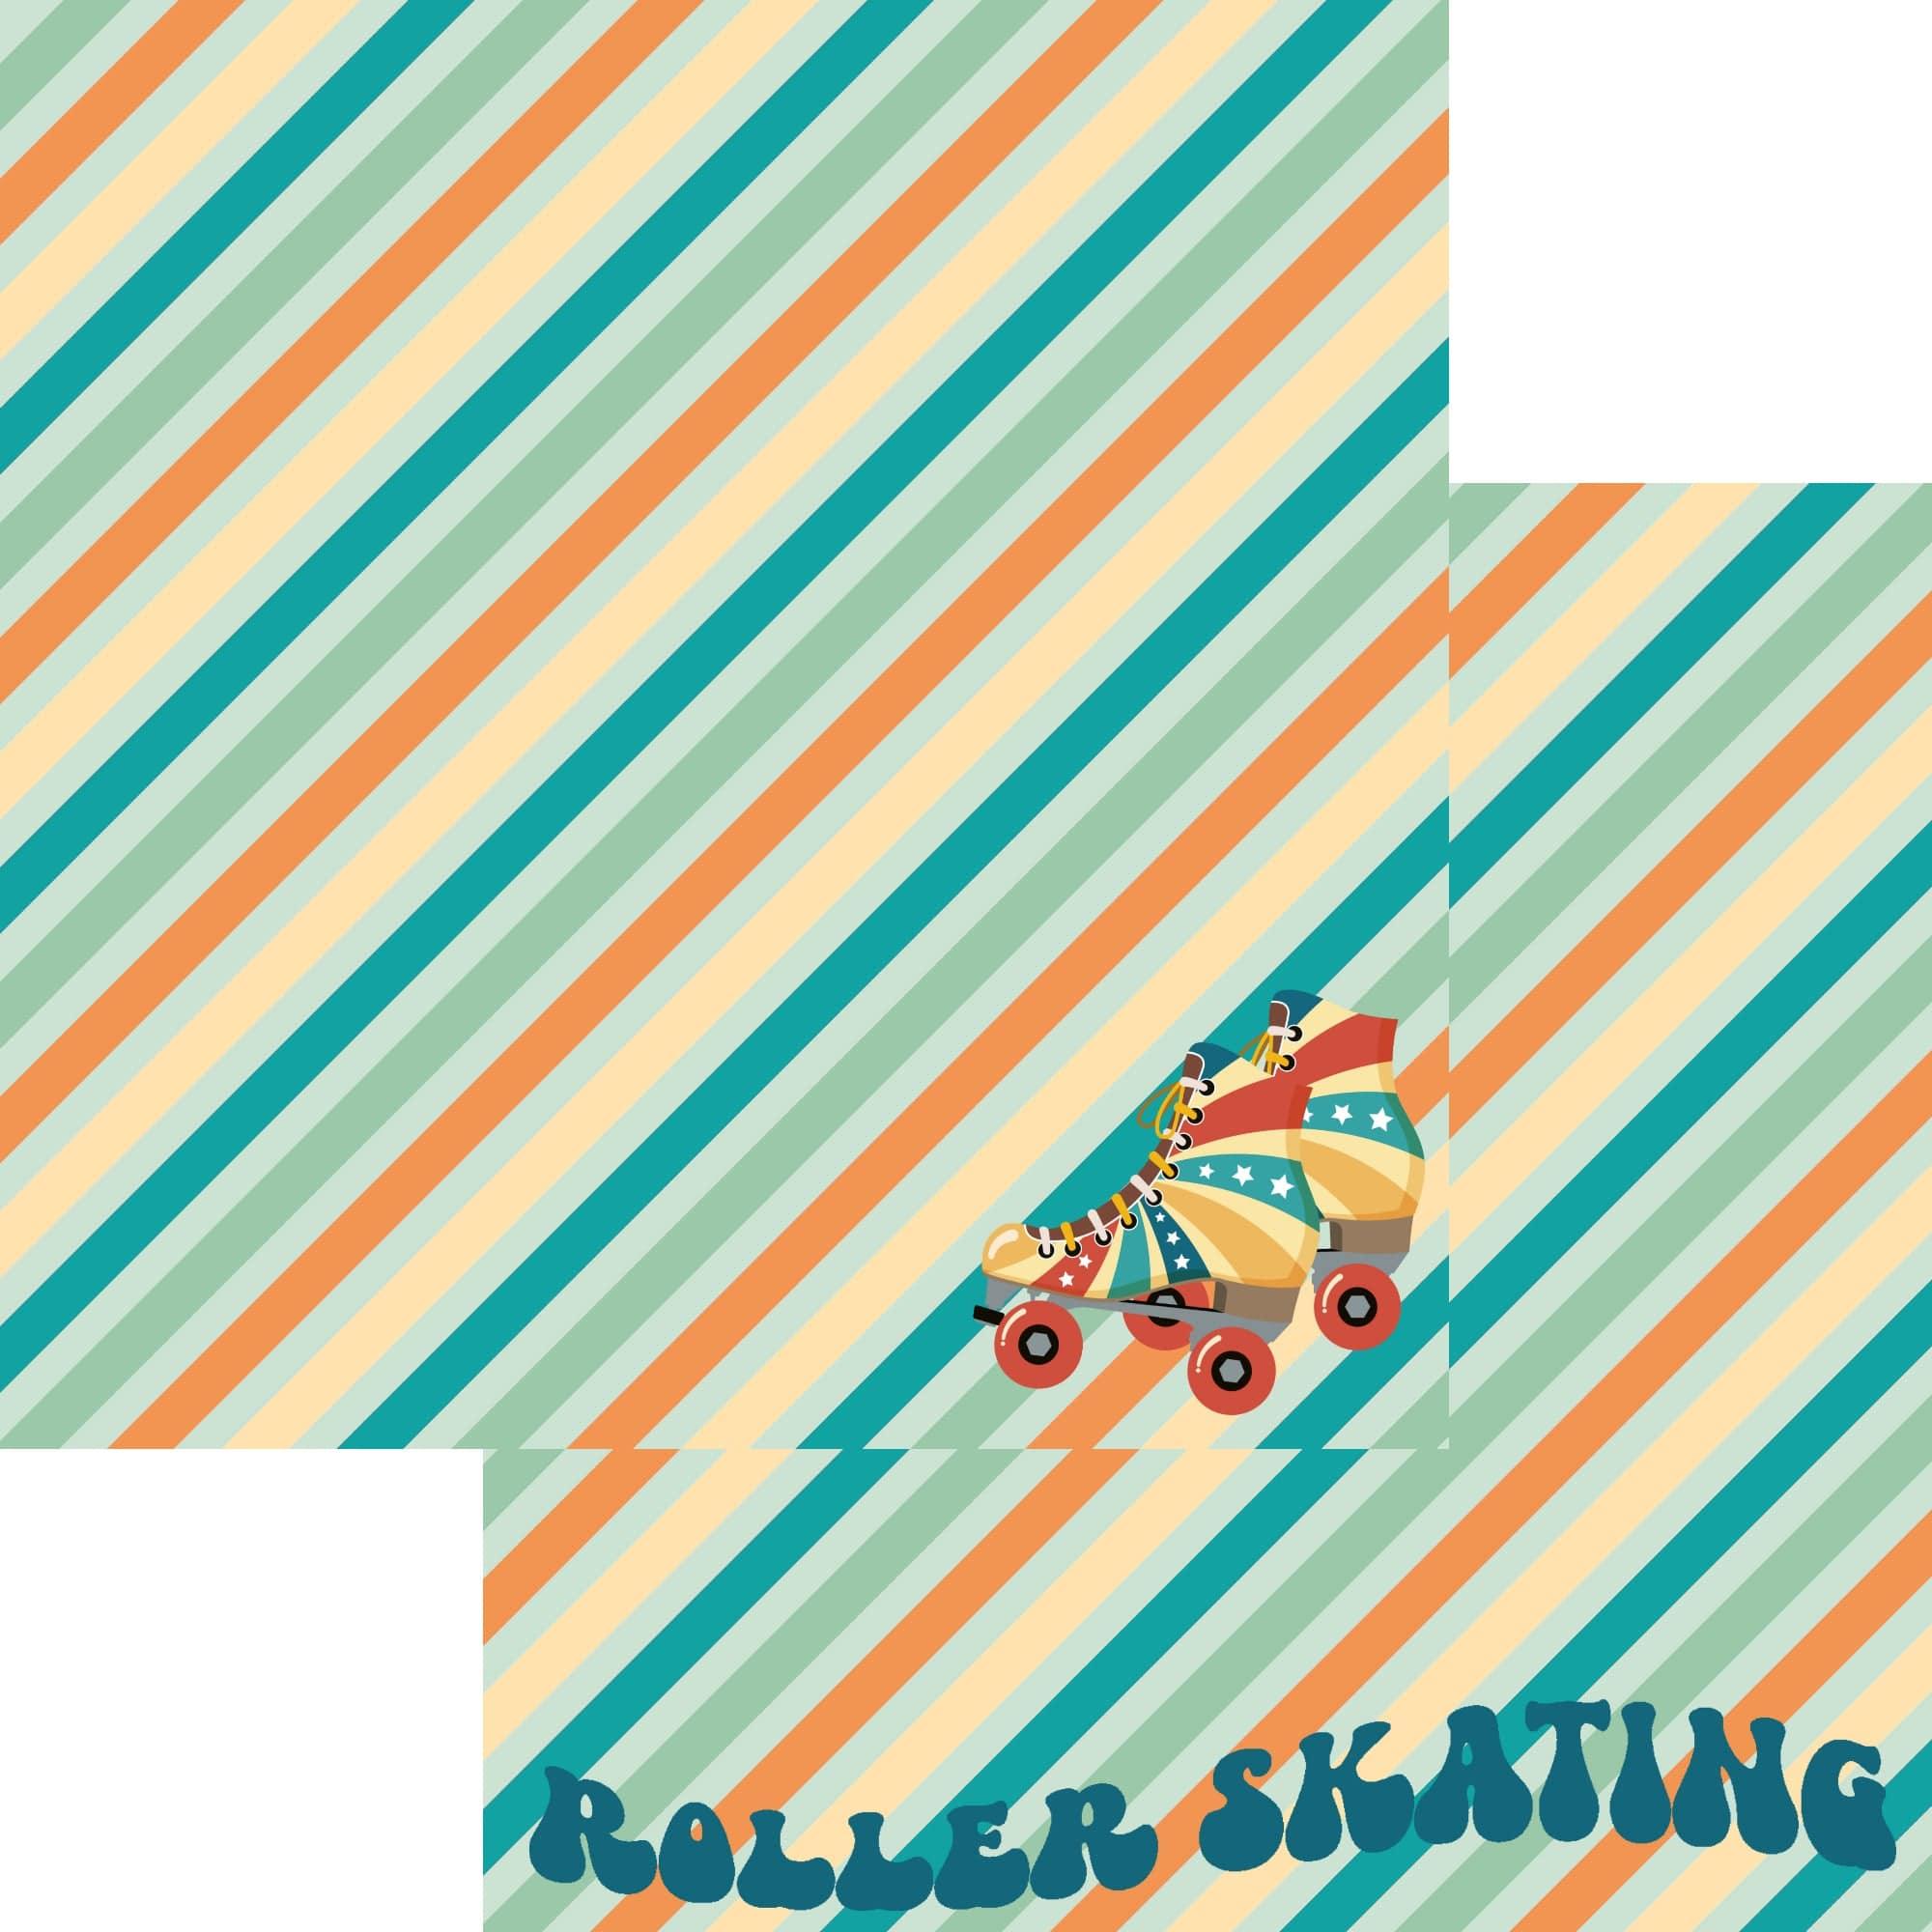 Just Fun Collection Roller Skating 12 x 12 Double-Sided Scrapbook Paper by SSC Designs